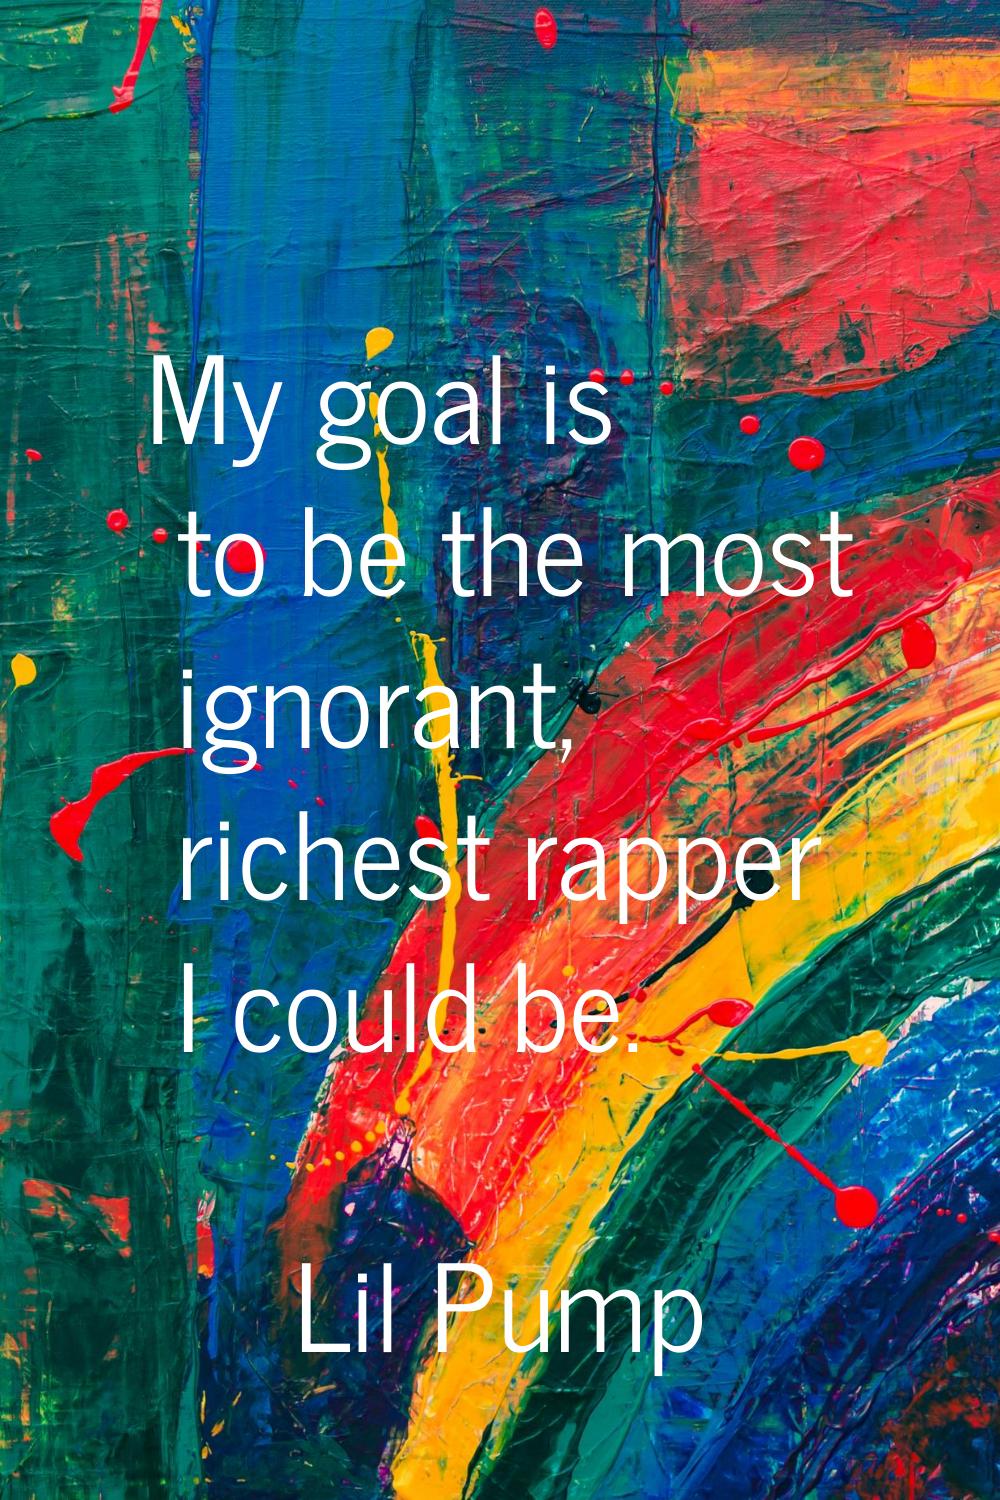 My goal is to be the most ignorant, richest rapper I could be.